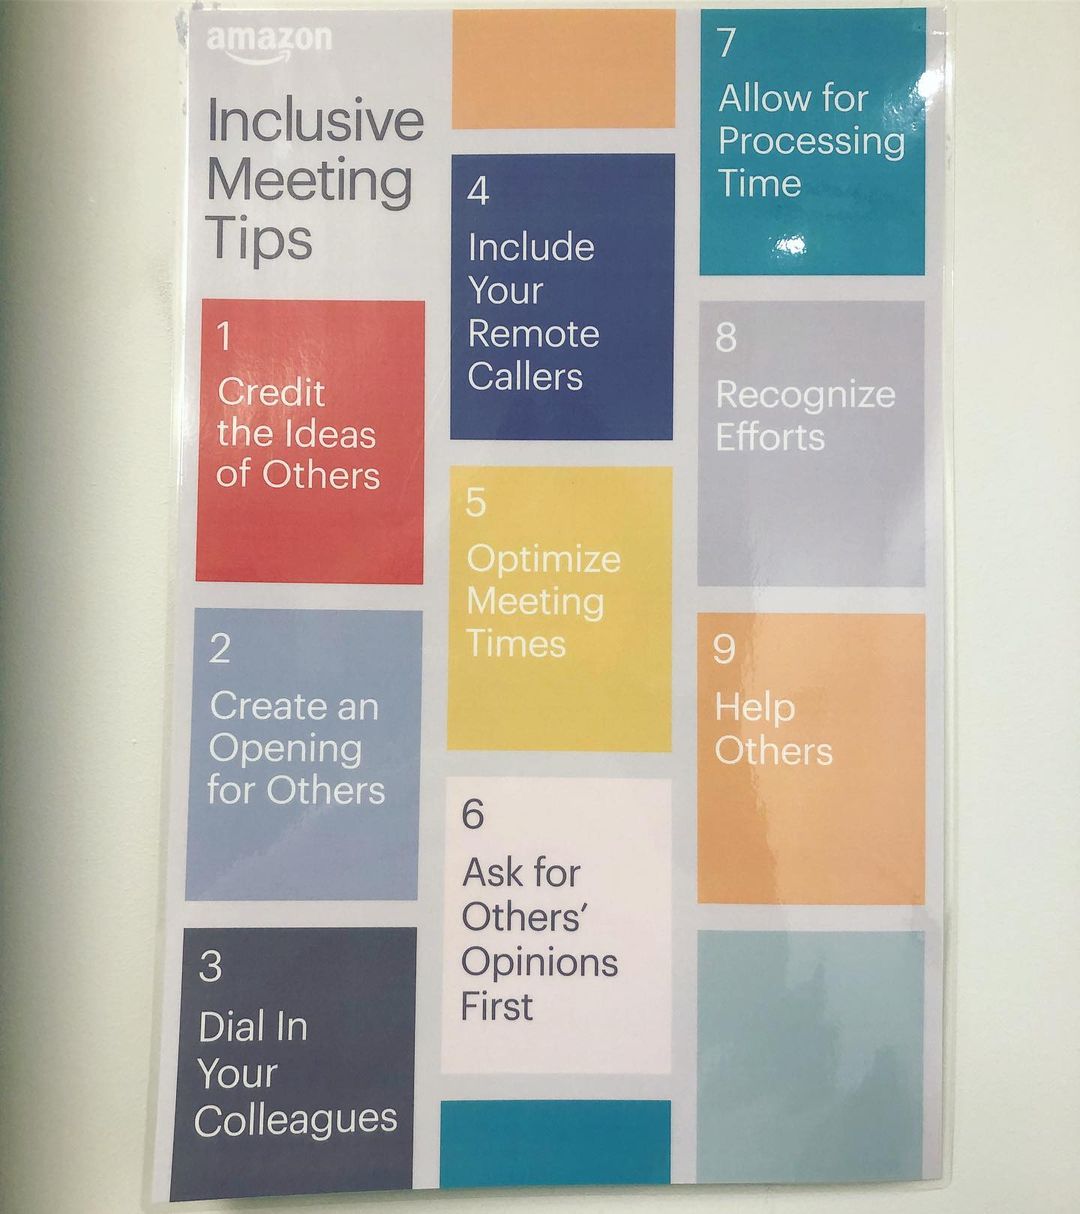 Inclusive meeting tips